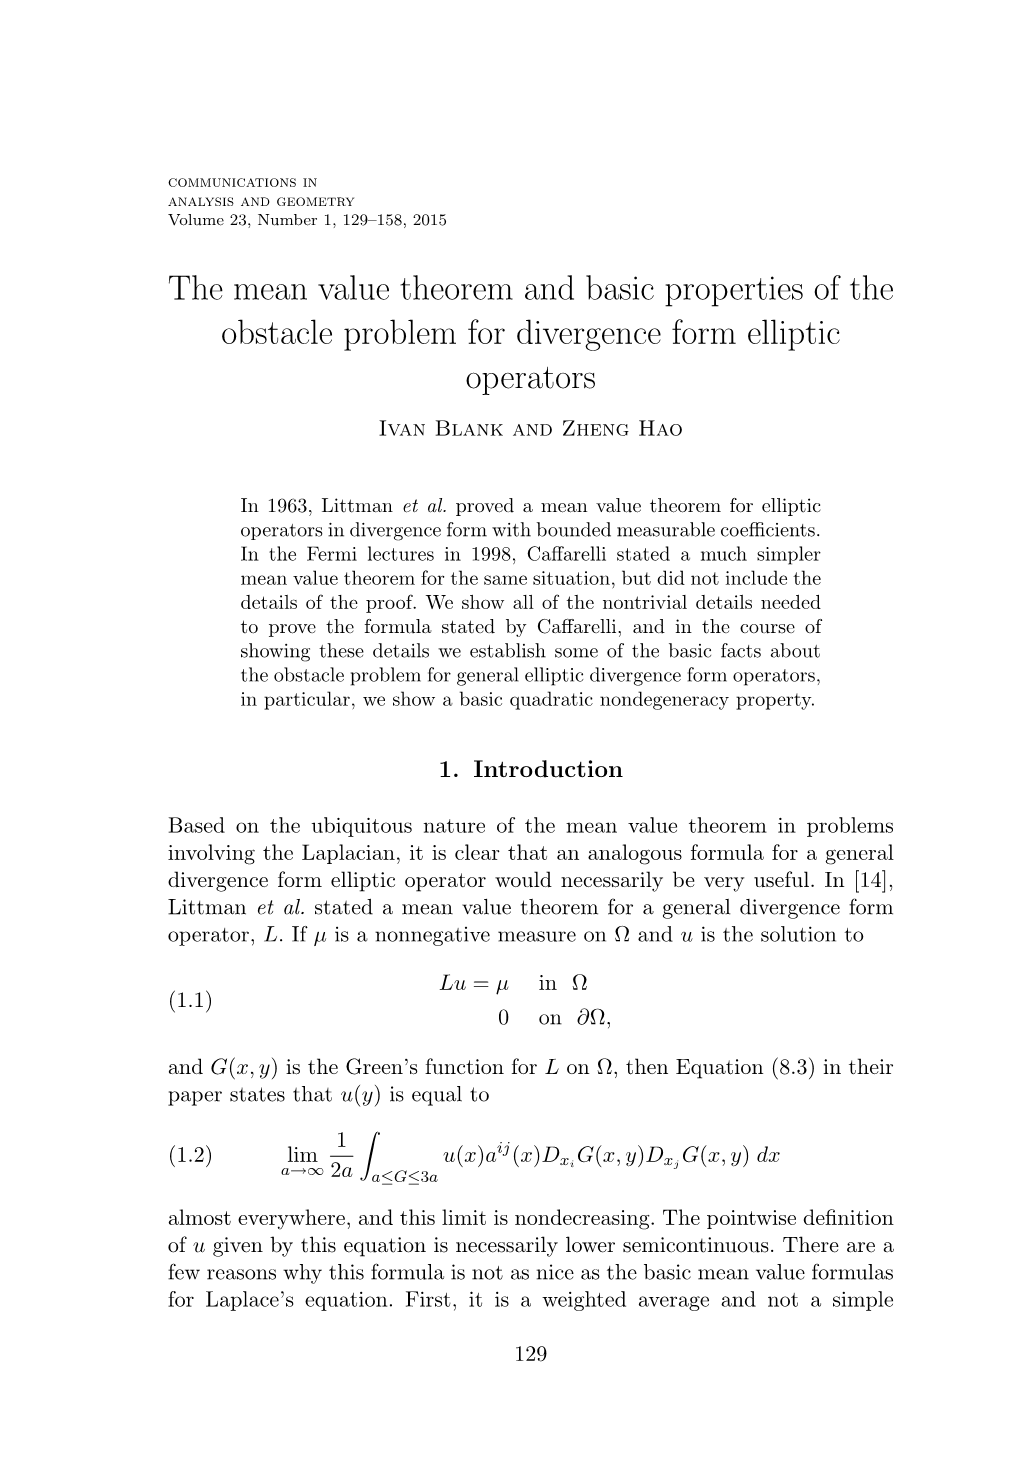 The Mean Value Theorem and Basic Properties of the Obstacle Problem for Divergence Form Elliptic Operators Ivan Blank and Zheng Hao